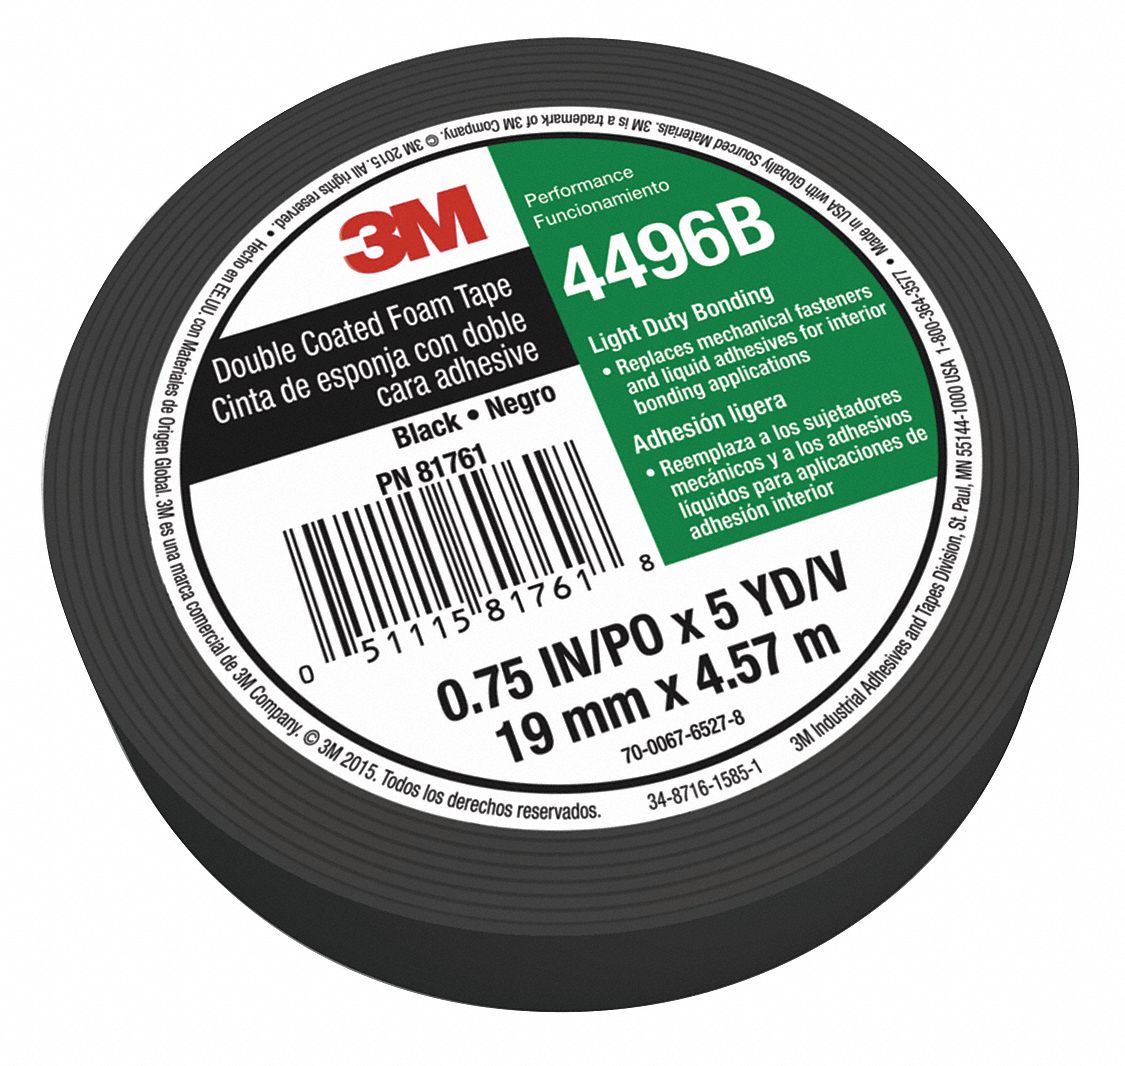 0744466125M112 Black 4466 3M Double-Sided Tape .5" x 5 yds 